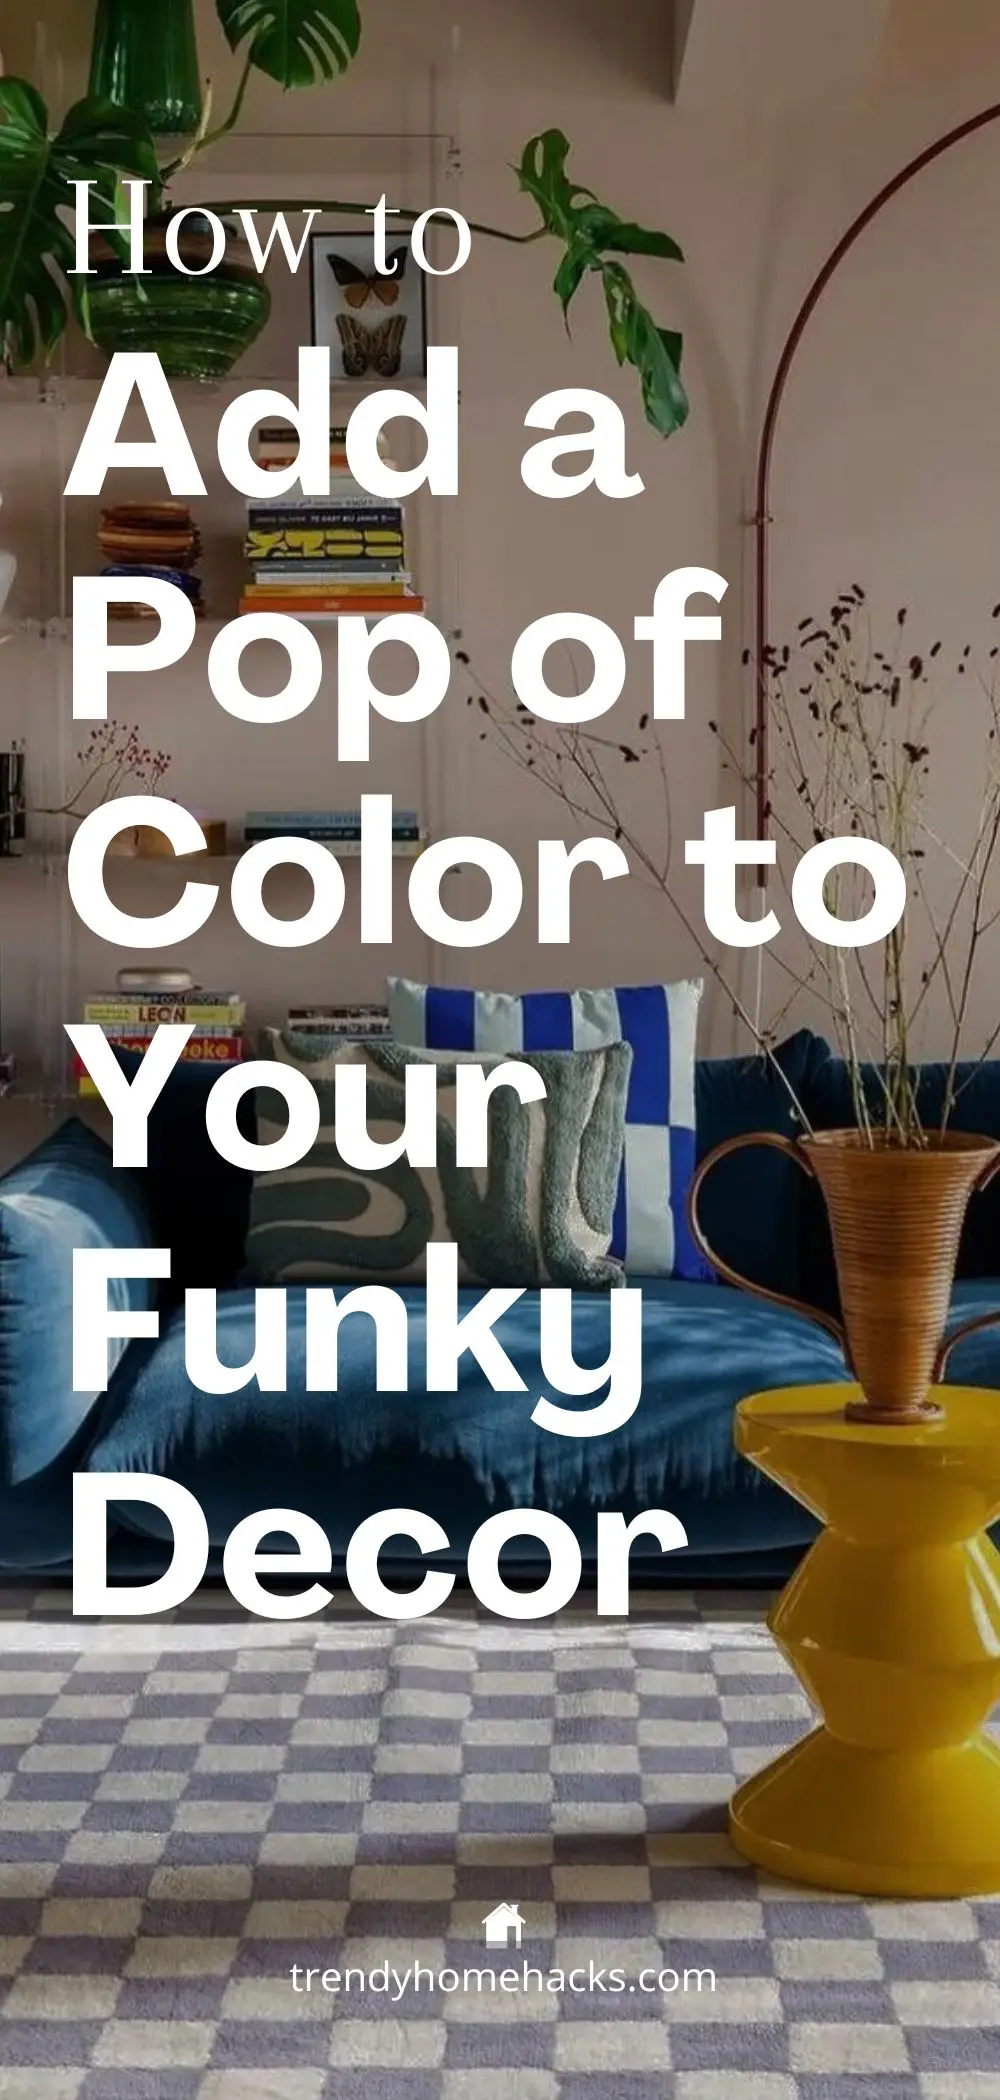 a tall Pinterest pin with a dark image background of a living room and text overlay "How to add a pop of color to your funky decor."